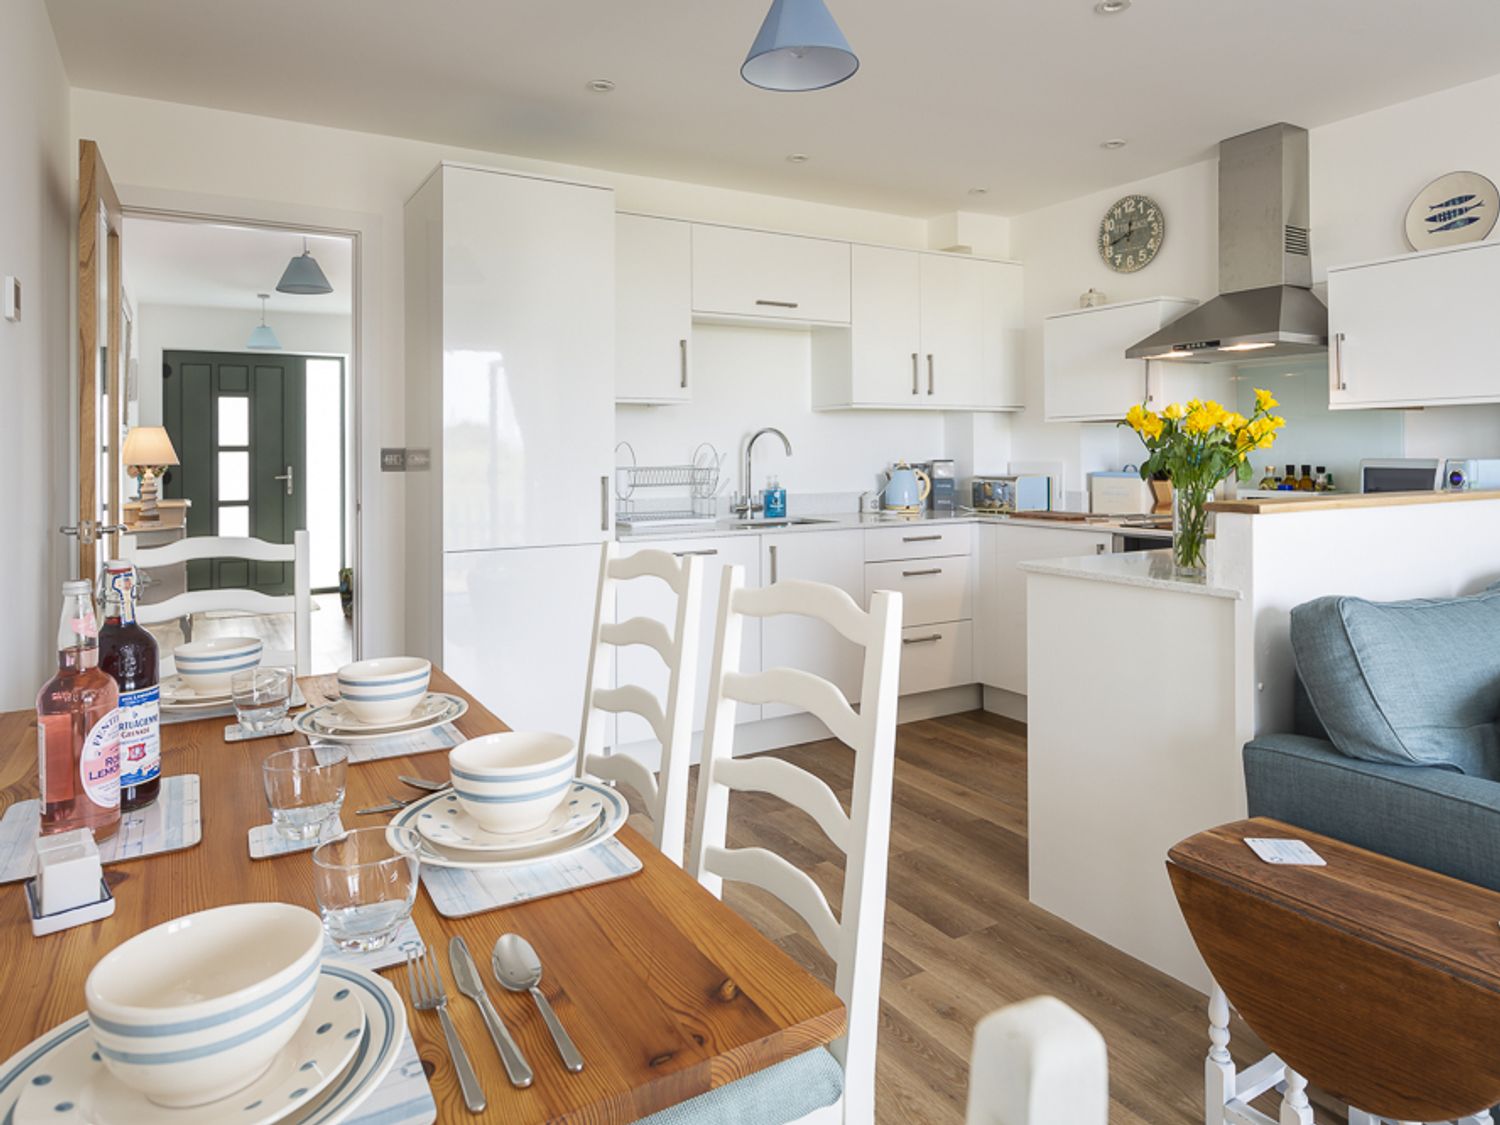 3 Ocean Reach, Bolberry - Devon - England : Cottages For Couples, Find ...